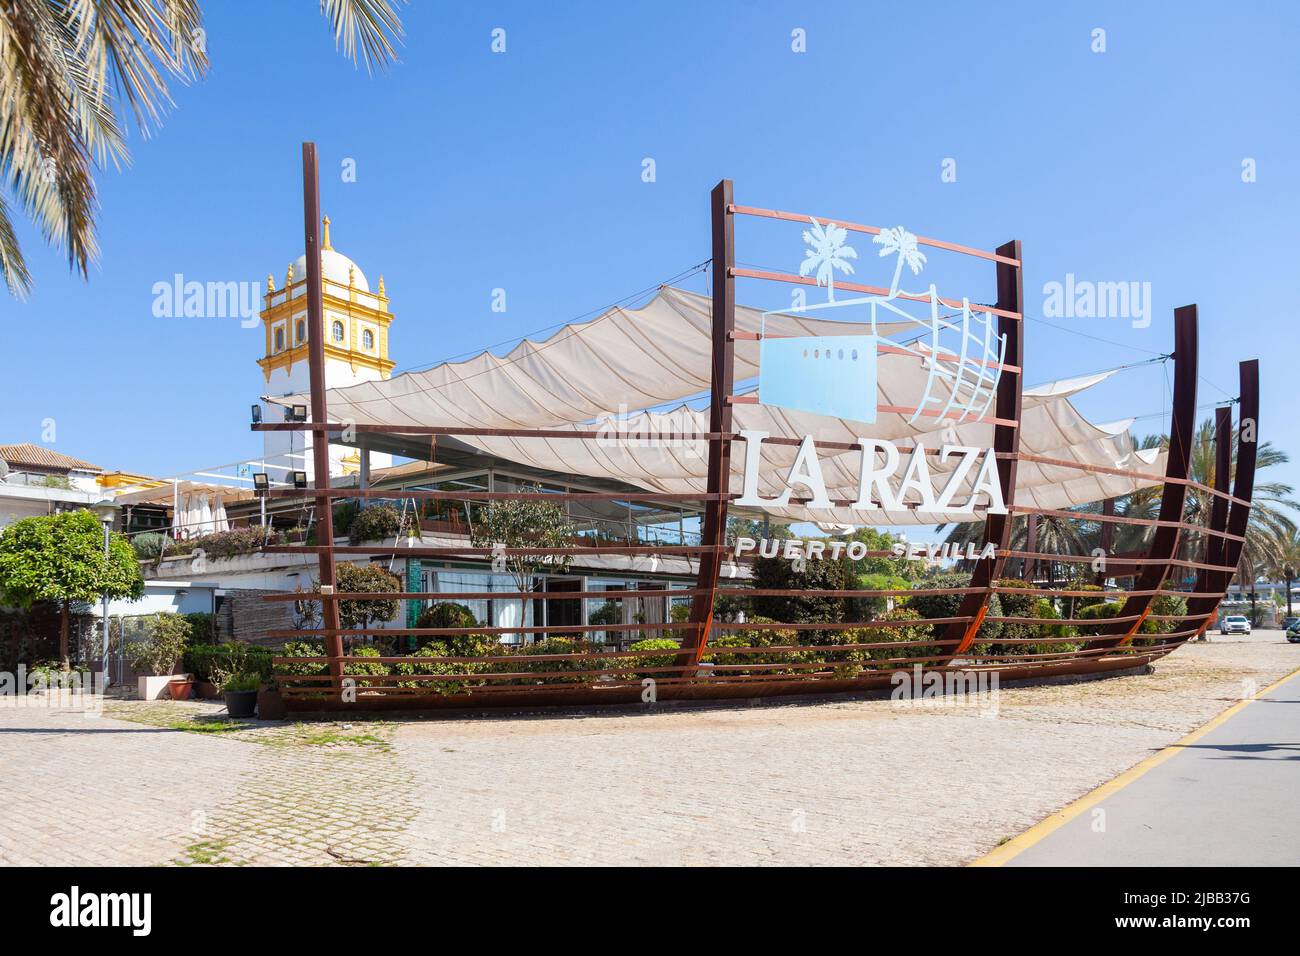 La Raza, a restaurant with architecture inspired by a boat's hull, on the promenade of the Guadalquivir River, Muelle de las Delicias, Port of Seville Stock Photo